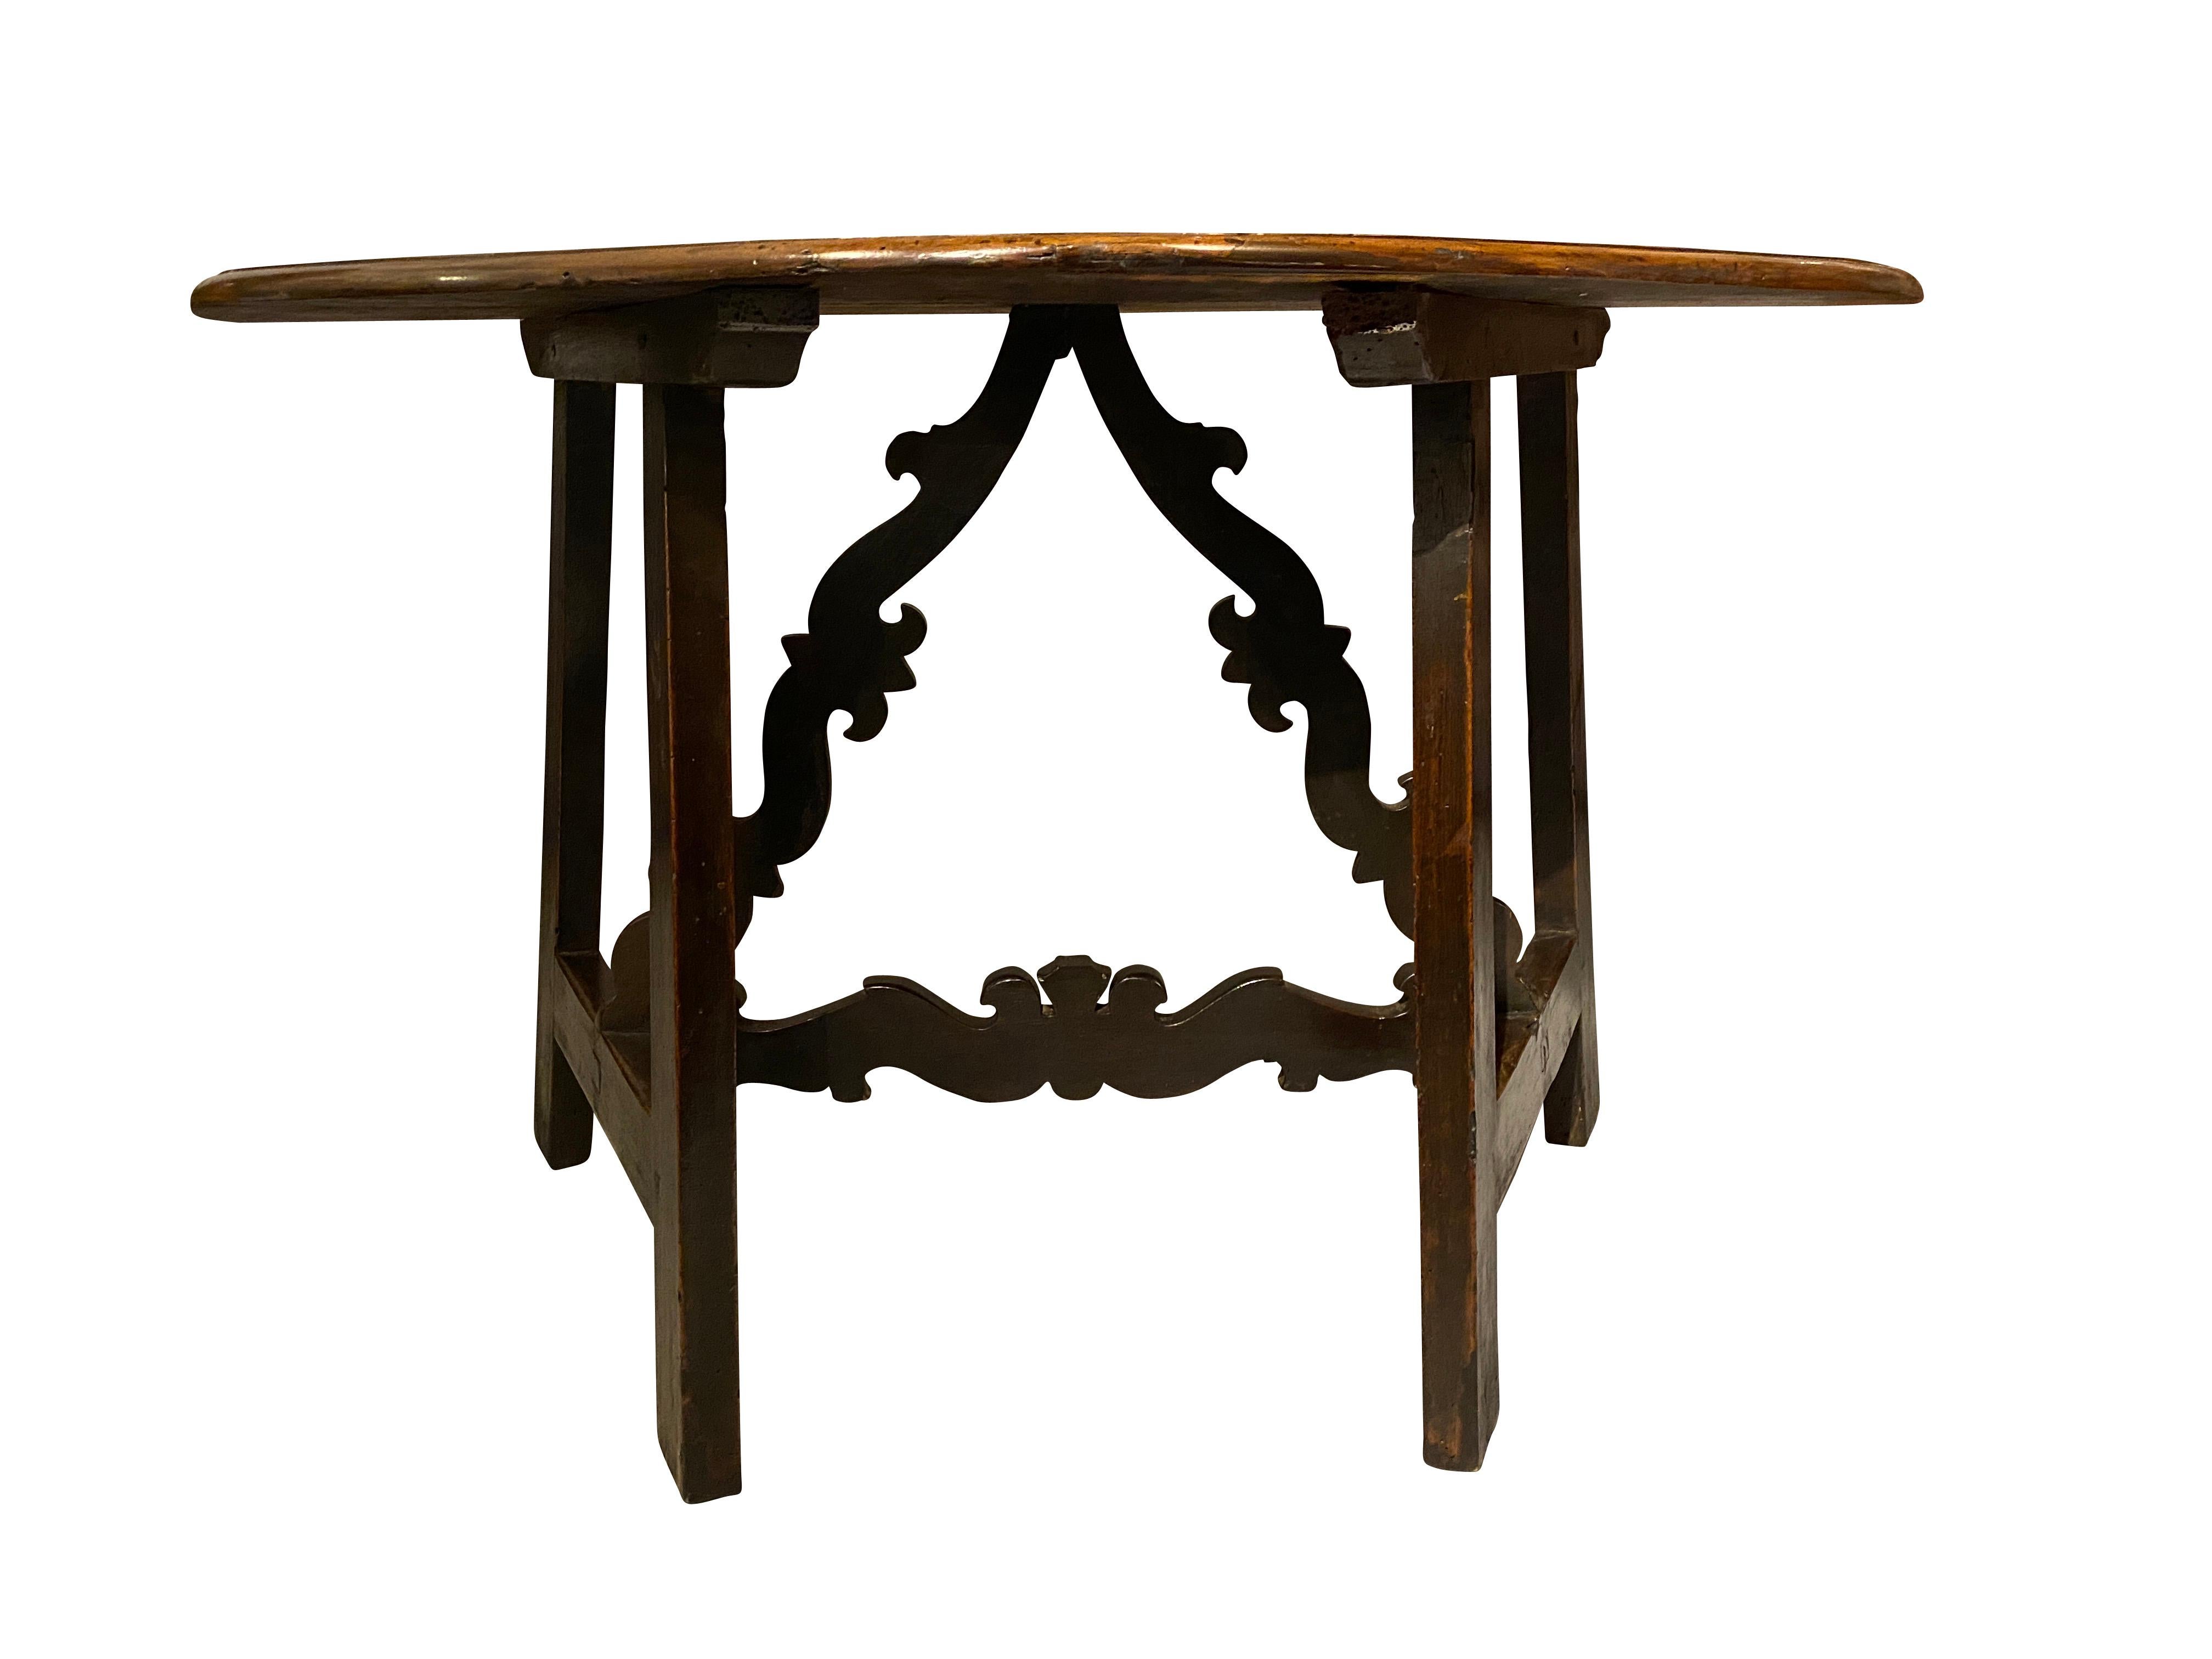 D shaped top with molded edge and great old rich brown patina over square section legs joined by shaped triangular form stretcher.